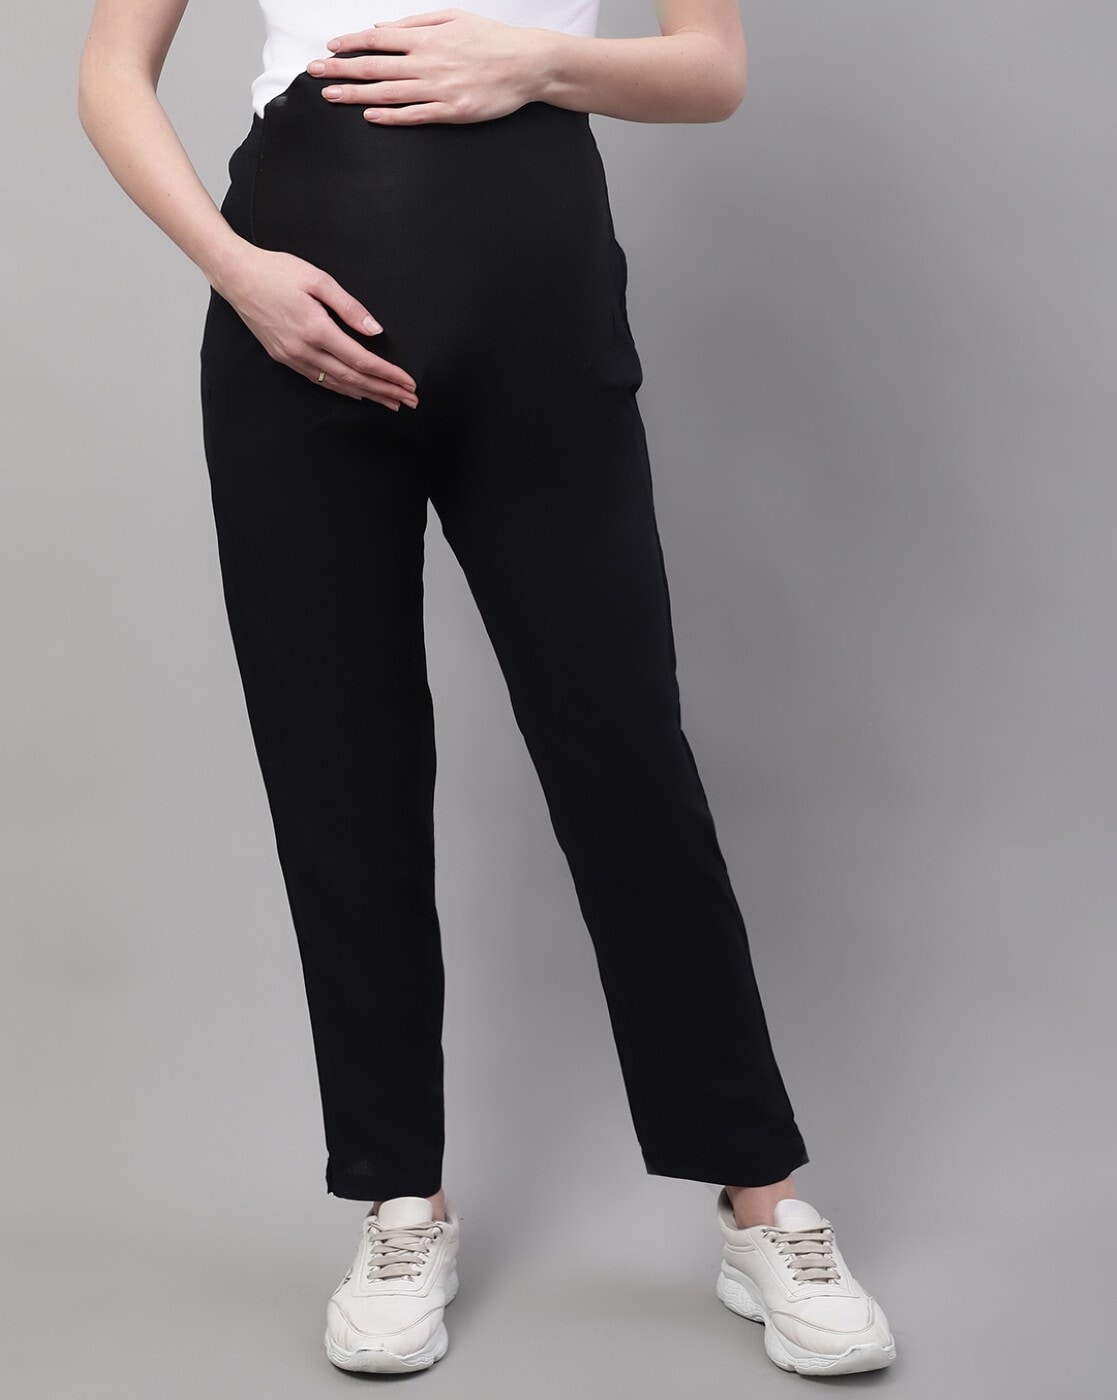 Bhome Maternity Jeans Stretch High Waisted PantsDress Pants for Work  Career Office Pants  Maternity work pants Maternity clothes fashionable Maternity  trousers